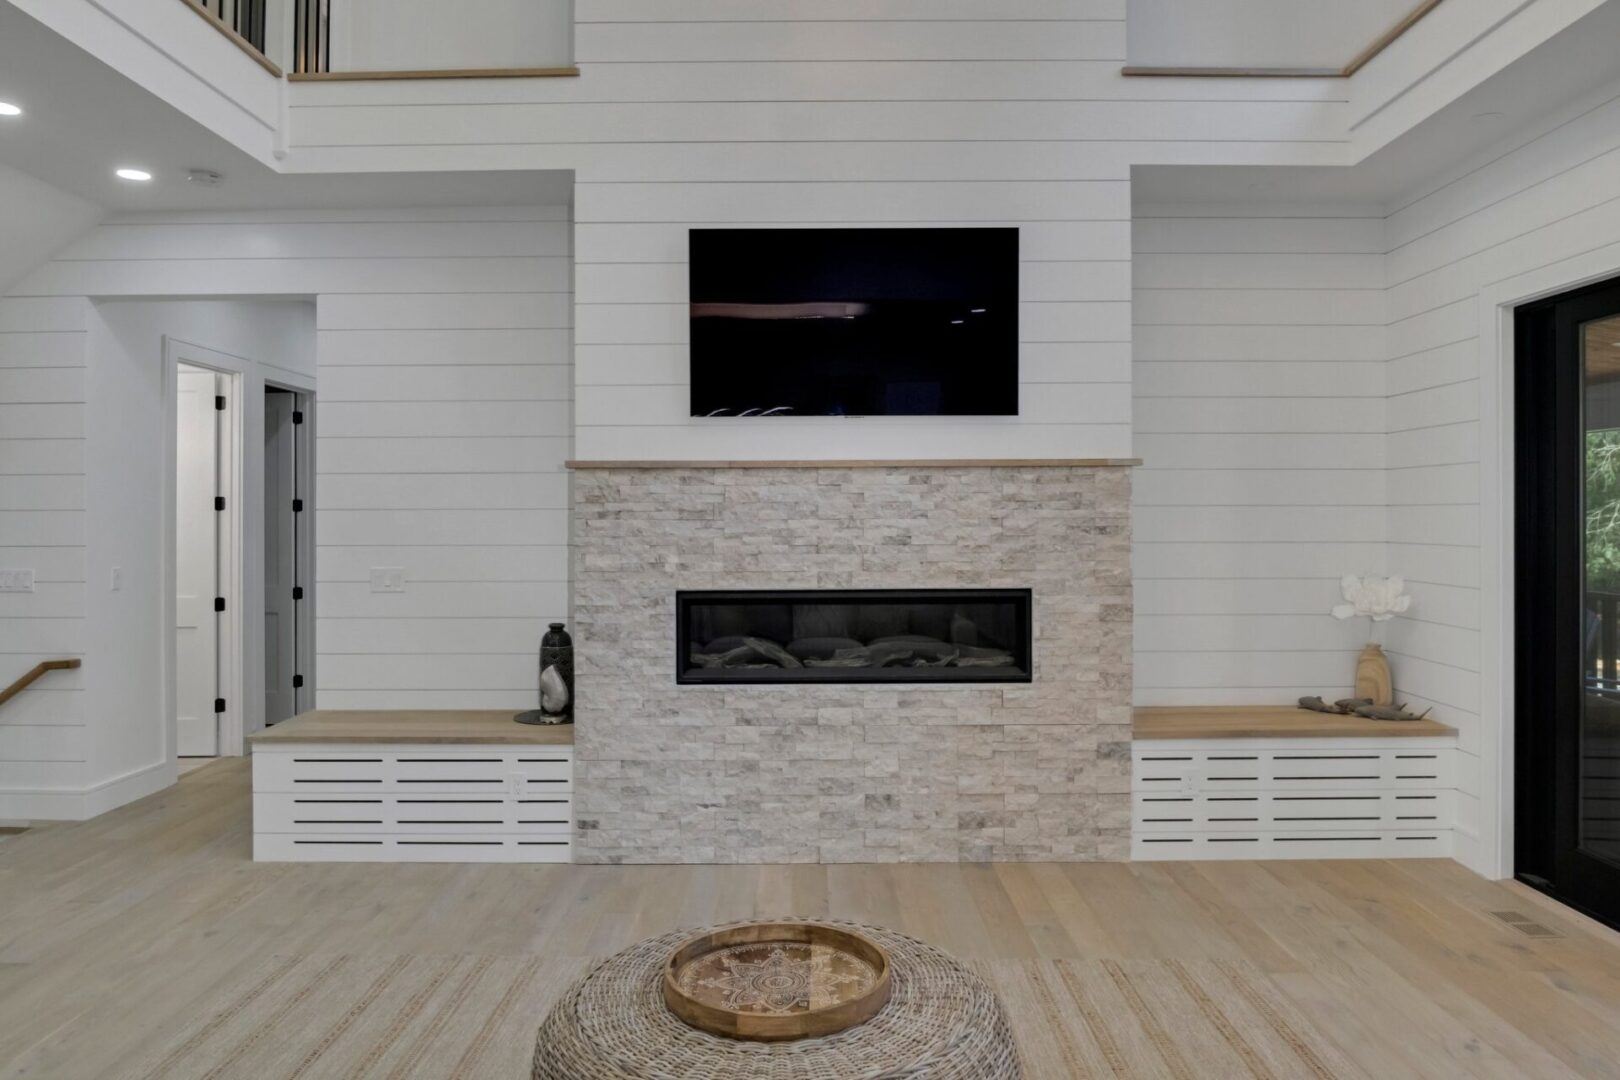 A fireplace with a tv above it and two wooden benches.